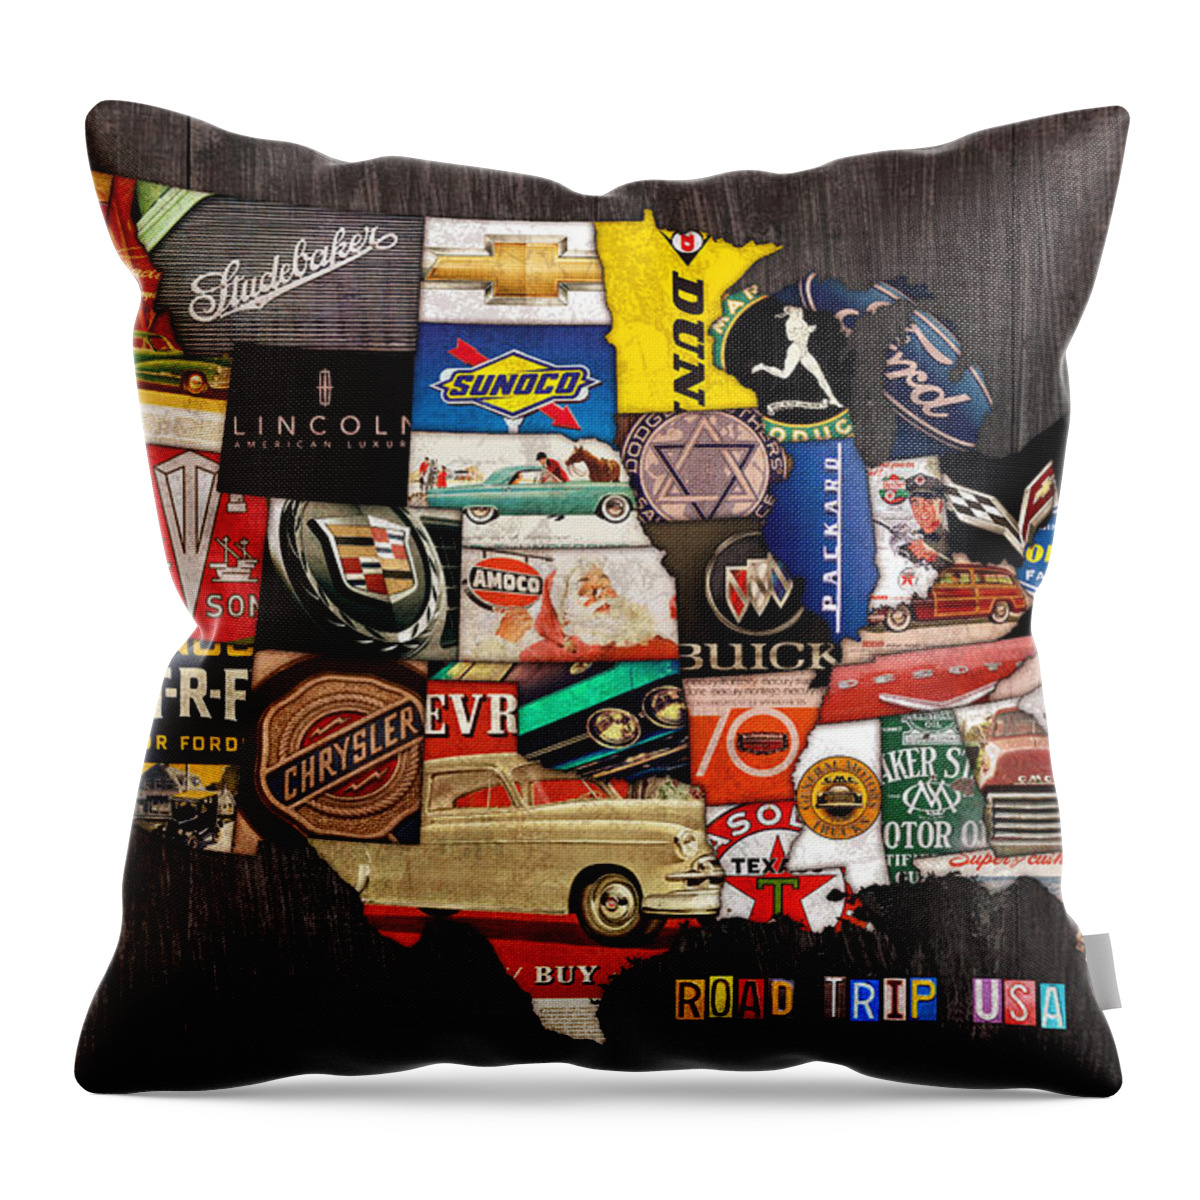 Road Trip Usa Throw Pillow featuring the mixed media Road Trip Usa American Love Affair with Cars and the Open Road by Design Turnpike